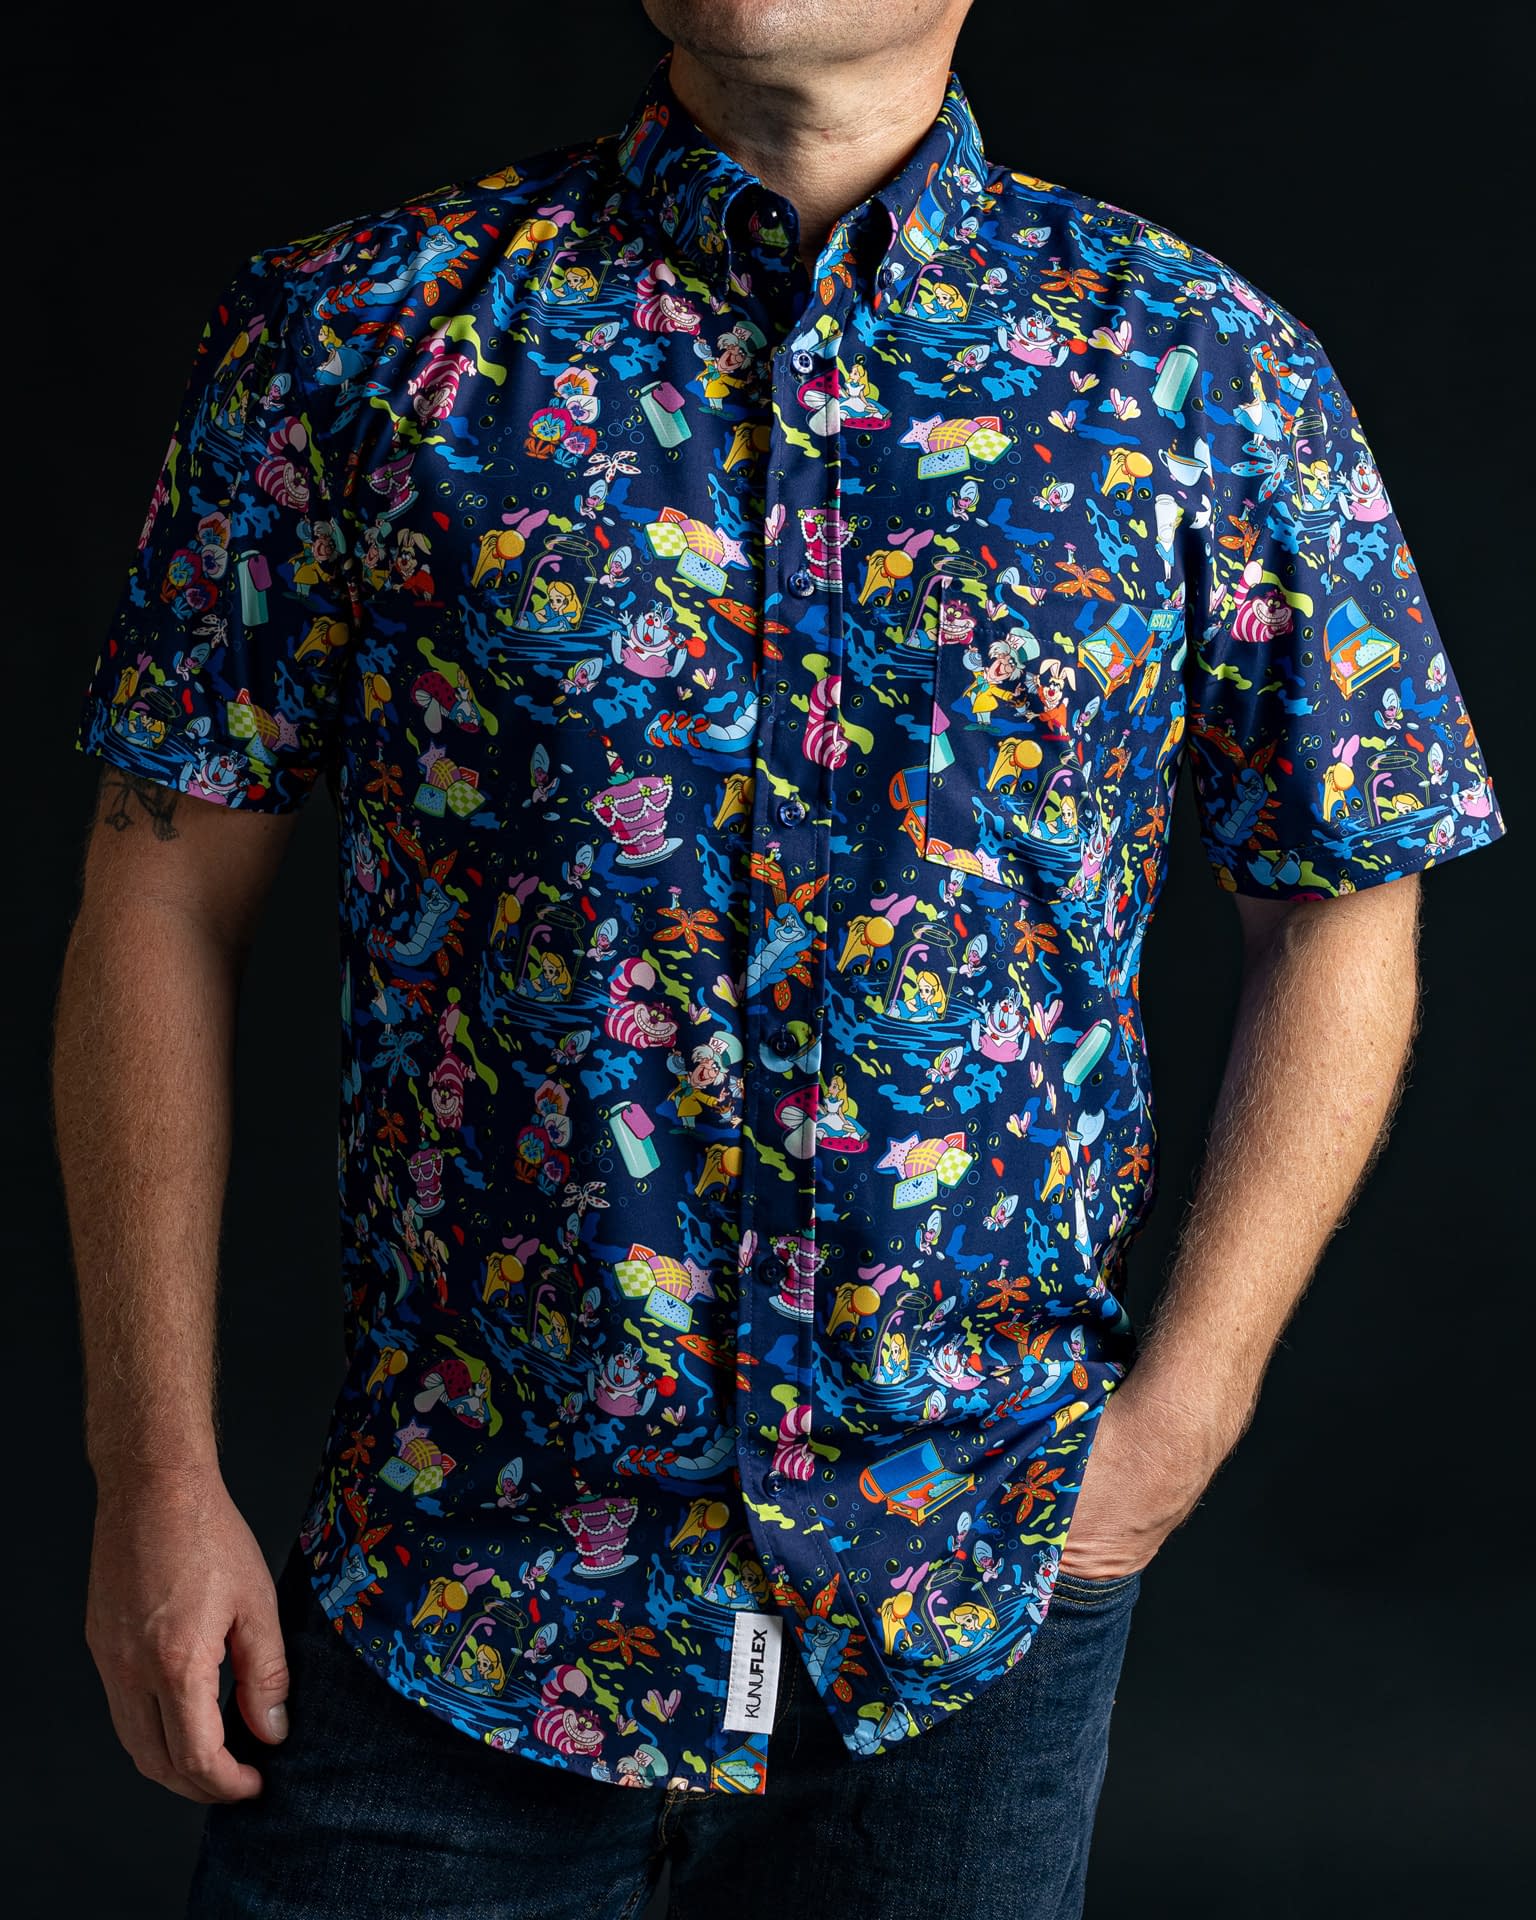 RSVLTS Debuts Delicious New and Exclusive Button-Downs for D23